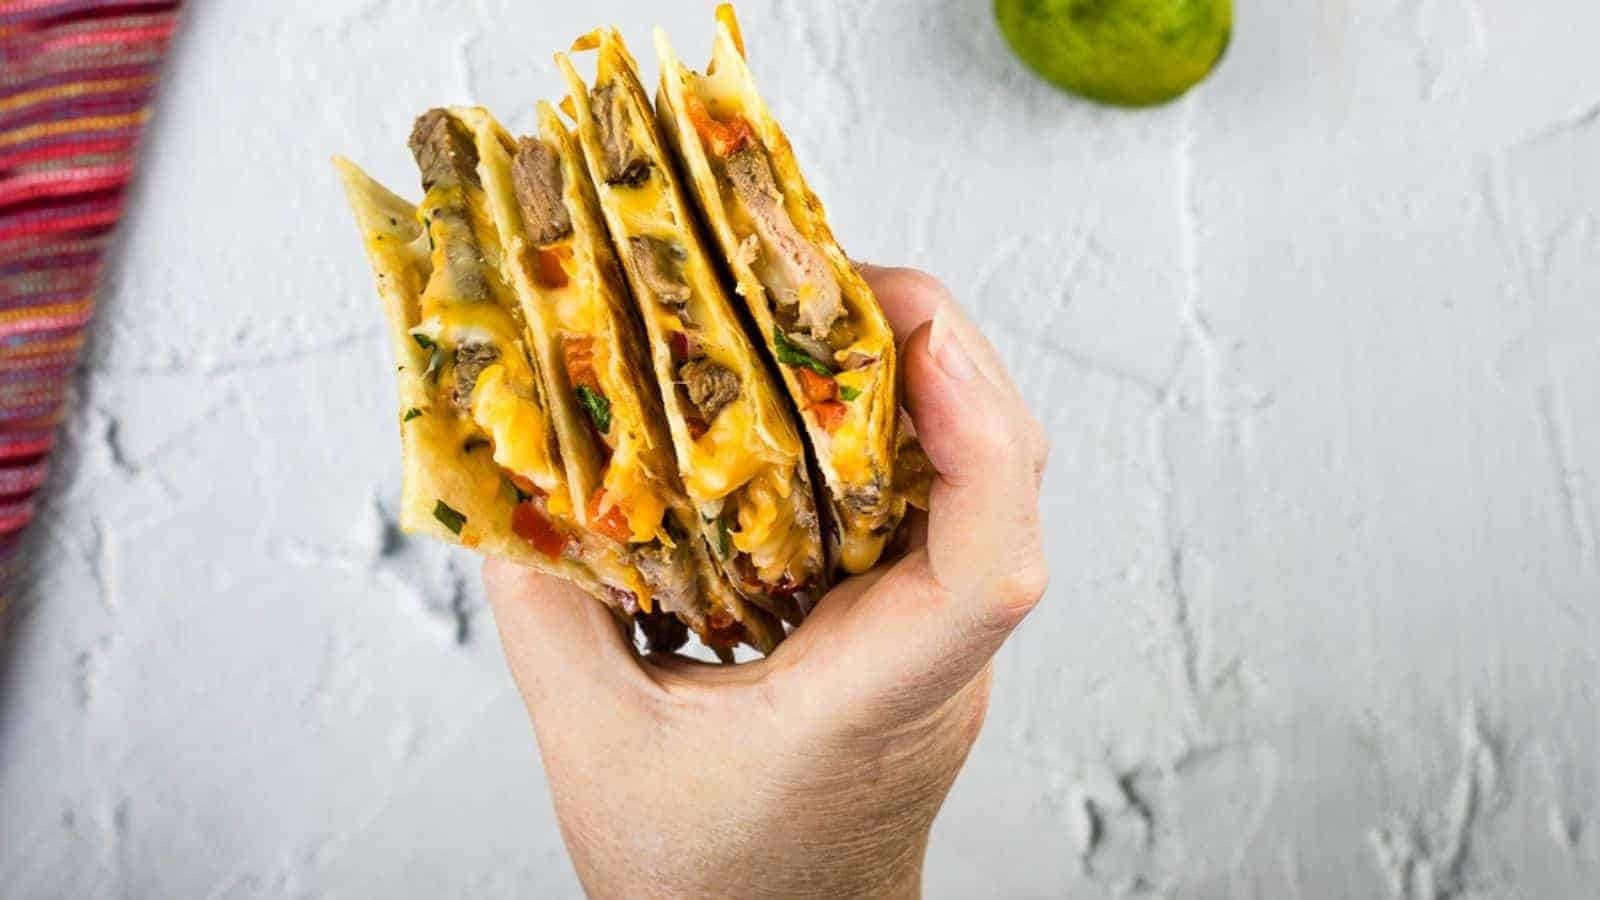 A hand holding wedges of a quesadilla.